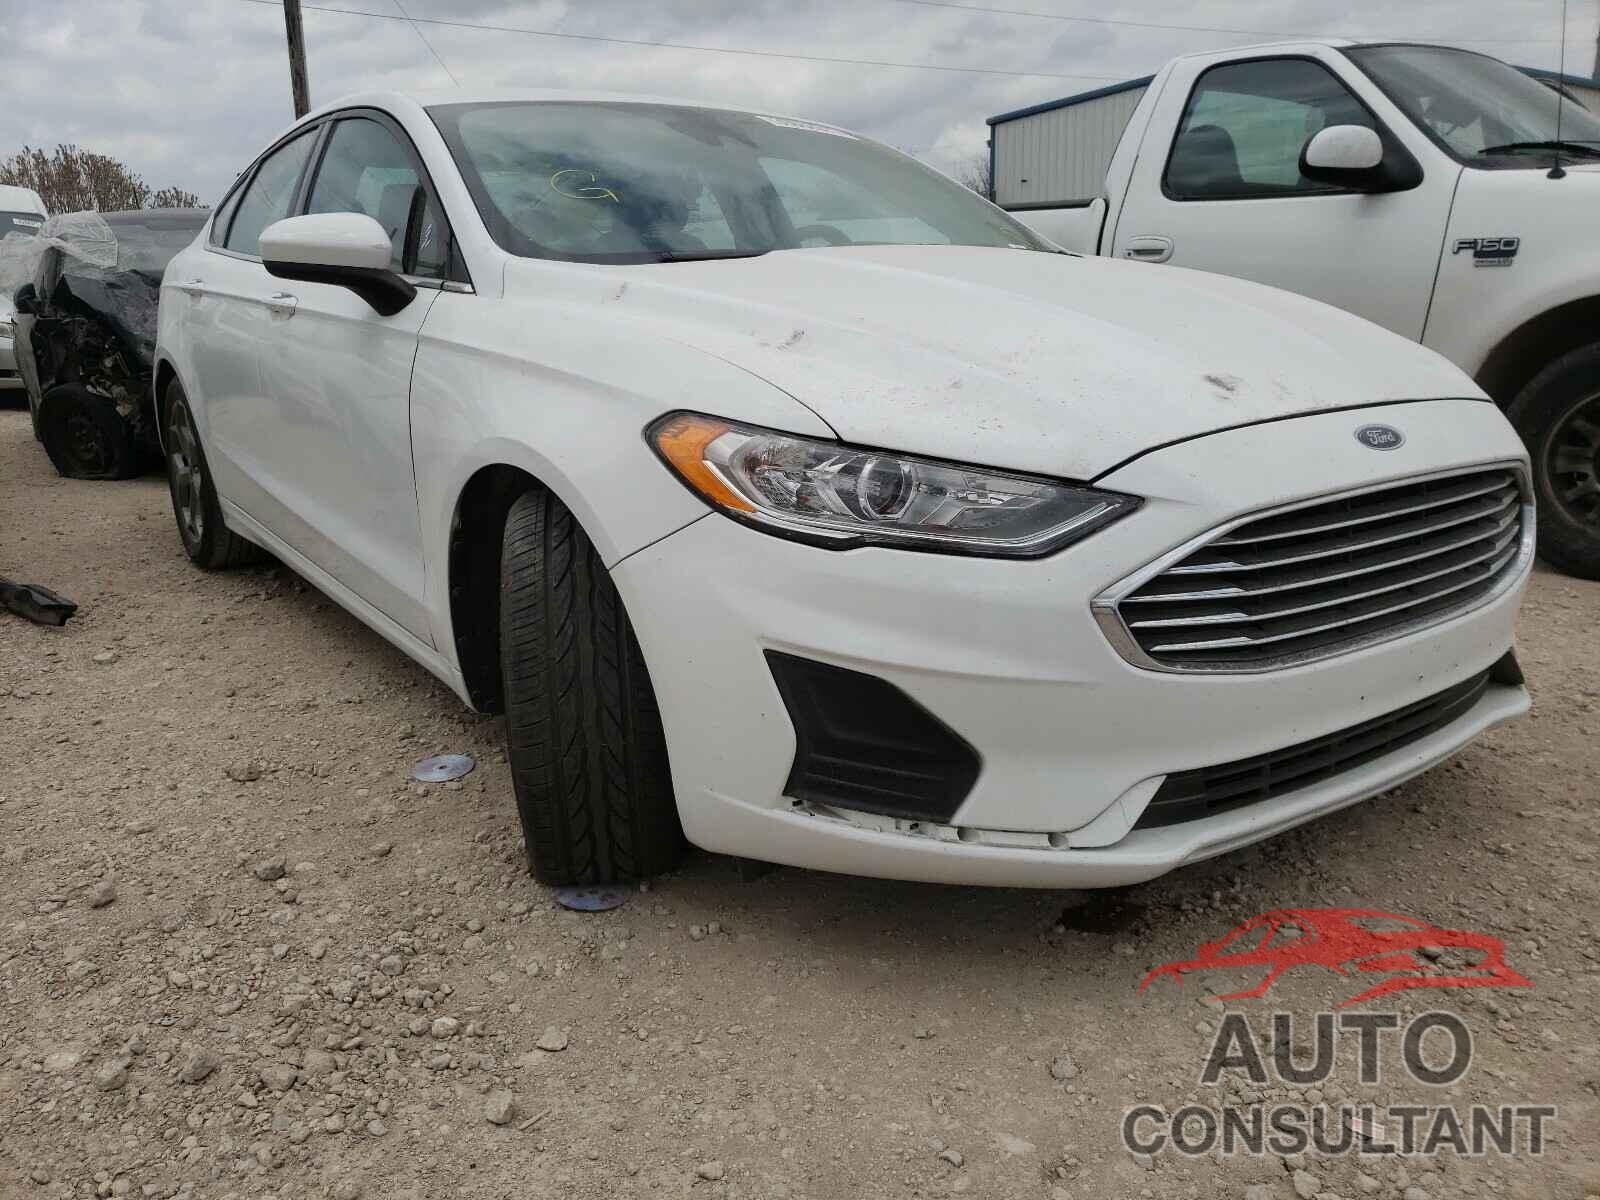 2019 FUSION FORD